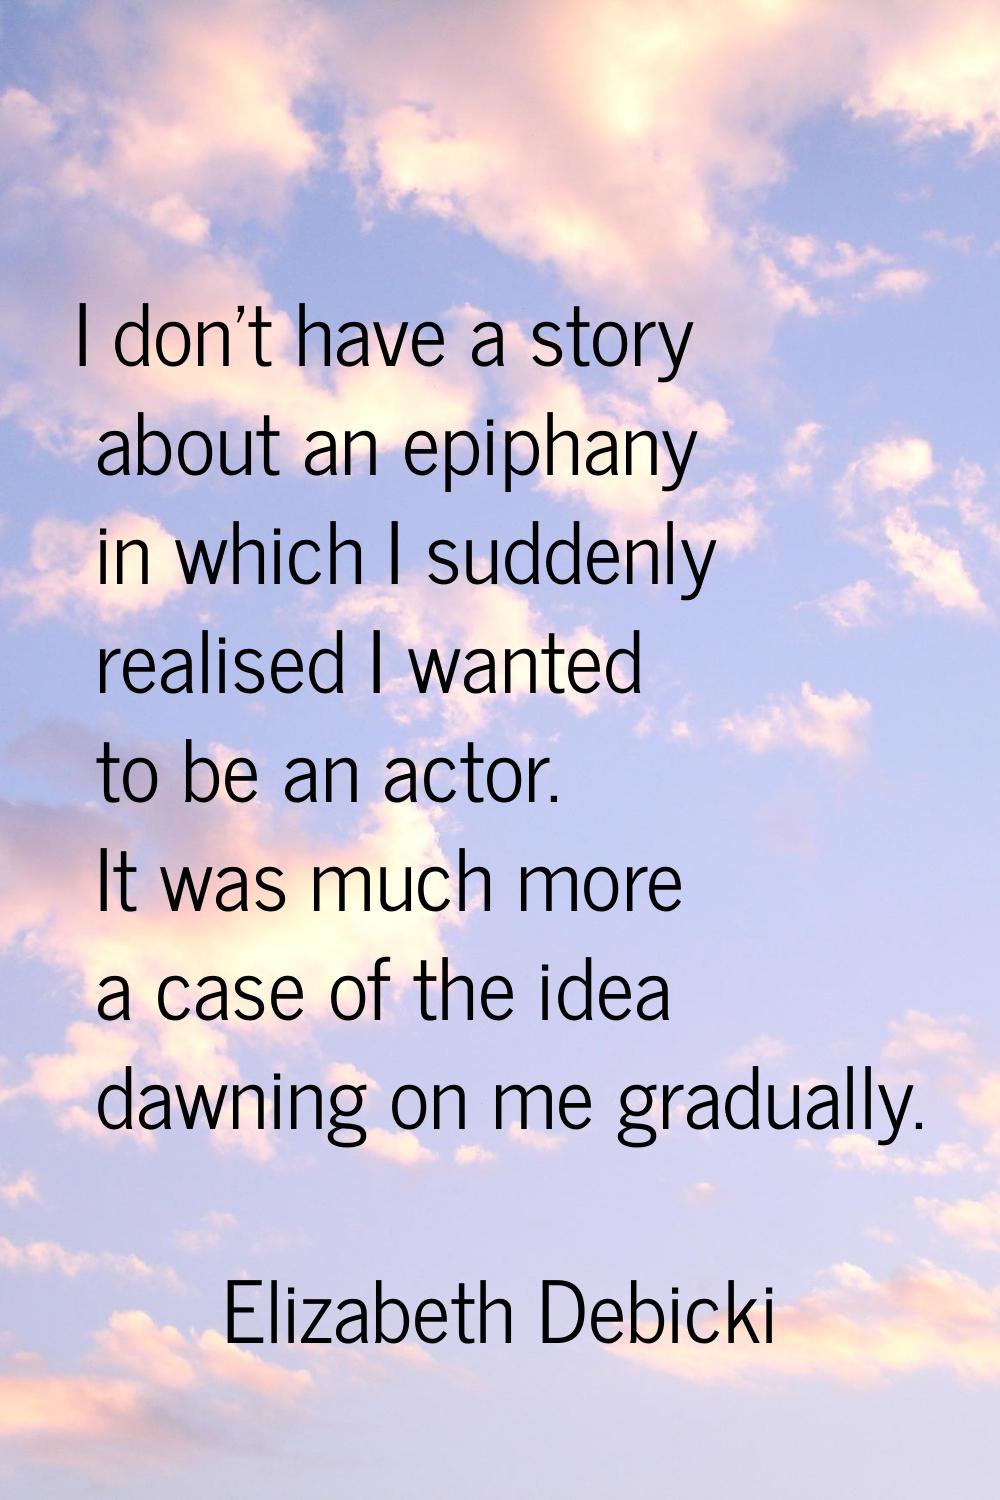 I don't have a story about an epiphany in which I suddenly realised I wanted to be an actor. It was